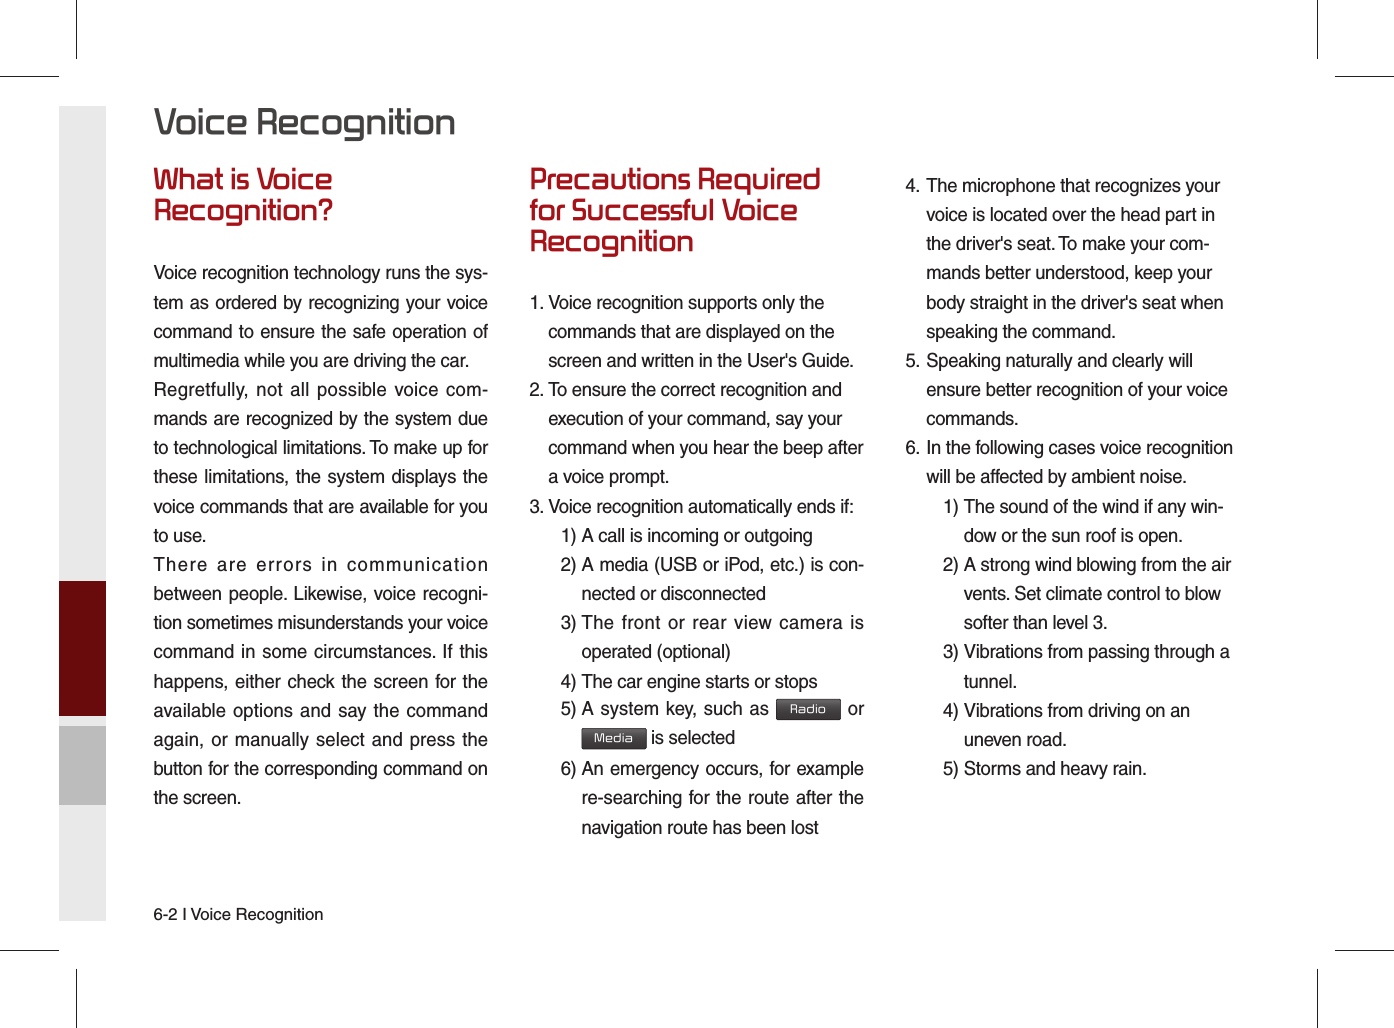 6-2 I Voice RecognitionWhat is Voice Recognition?Voice recognition technology runs the sys-tem as ordered by recognizing your voice command to ensure the safe operation of multimedia while you are driving the car.Regretfully, not all possible voice com-mands are recognized by the system due to technological limitations. To make up for these limitations, the system displays the voice commands that are available for you to use.There are errors in communication between people. Likewise, voice recogni-tion sometimes misunderstands your voice command in some circumstances. If this happens, either check the screen for the available options and say the command again, or manually select and press the button for the corresponding command on the screen.Precautions Required for Successful Voice Recognition1.  Voice recognition supports only the commands that are displayed on the screen and written in the User&apos;s Guide.2.  To ensure the correct recognition and execution of your command, say your command when you hear the beep after a voice prompt.3.  Voice recognition automatically ends if:  1) A call is incoming or outgoing 2)  A media (USB or iPod, etc.) is con-nected or disconnected 3)  The front or rear view camera is operated (optional) 4)  The car engine starts or stops 5)  A system key, such as Radio or Media is selected 6)  An emergency occurs, for example re-searching for the route after the navigation route has been lost4.  The microphone that recognizes your voice is located over the head part in the driver&apos;s seat. To make your com-mands better understood, keep your body straight in the driver&apos;s seat when speaking the command.5.  Speaking naturally and clearly will ensure better recognition of your voice commands.6.  In the following cases voice recognition will be affected by ambient noise.    1)  The sound of the wind if any win-dow or the sun roof is open.    2)  A strong wind blowing from the air vents. Set climate control to blow softer than level 3. 3)  Vibrations from passing through a tunnel. 4)  Vibrations from driving on an uneven road.  5) Storms and heavy rain.Voice Recognition